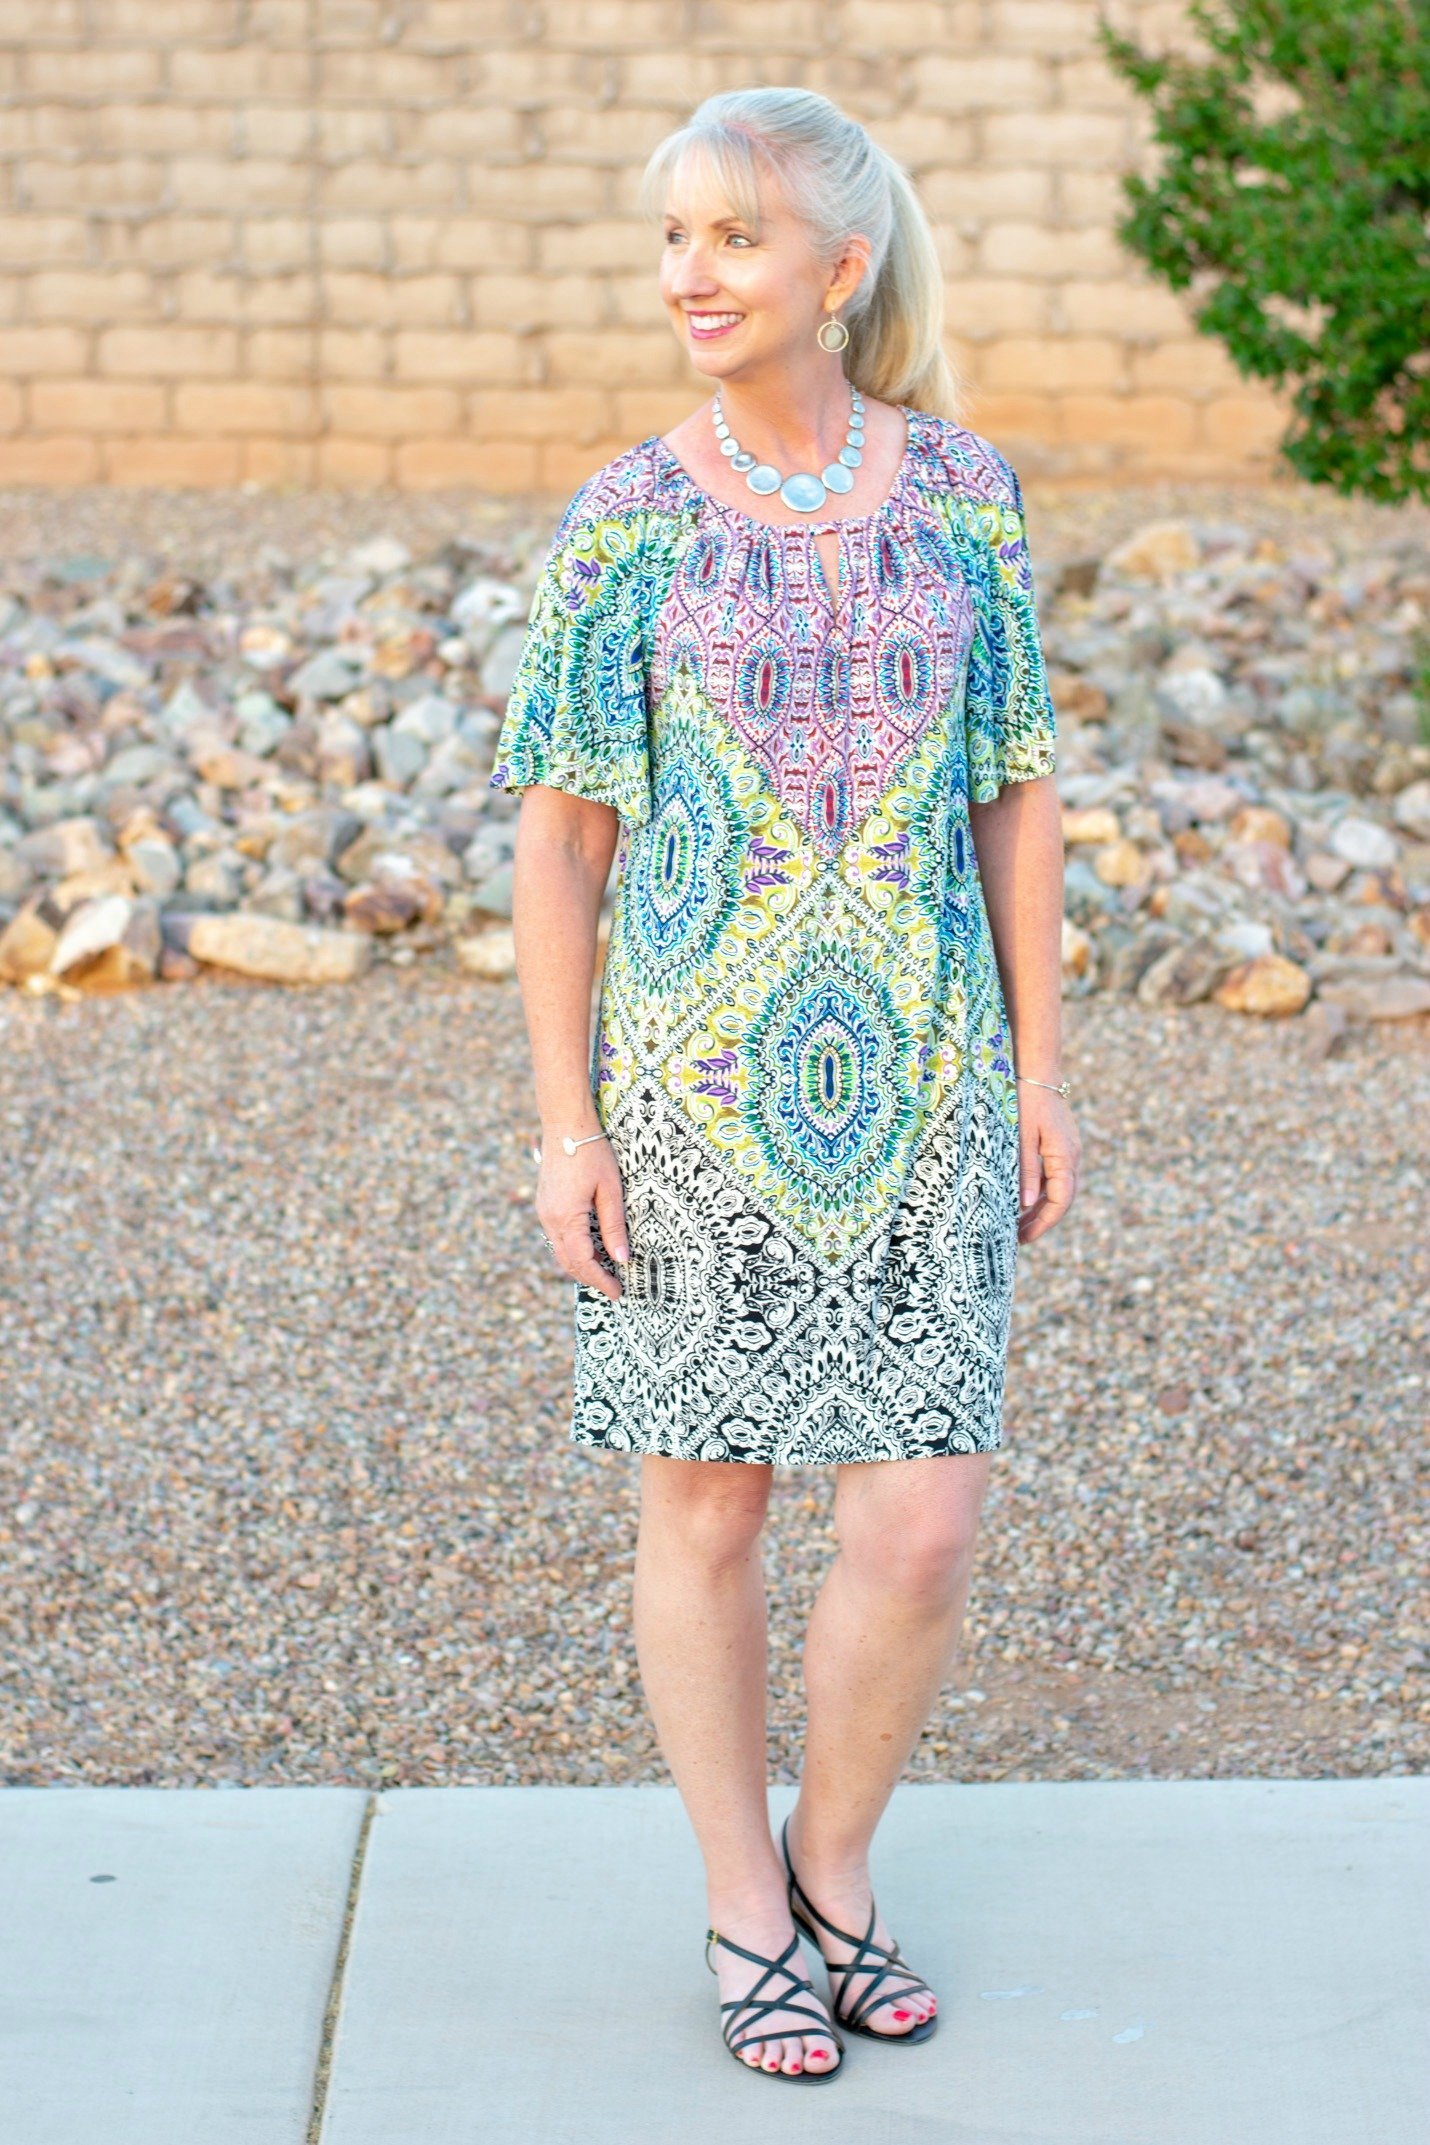 Mosaic Print Dress for Chico's for ease and style